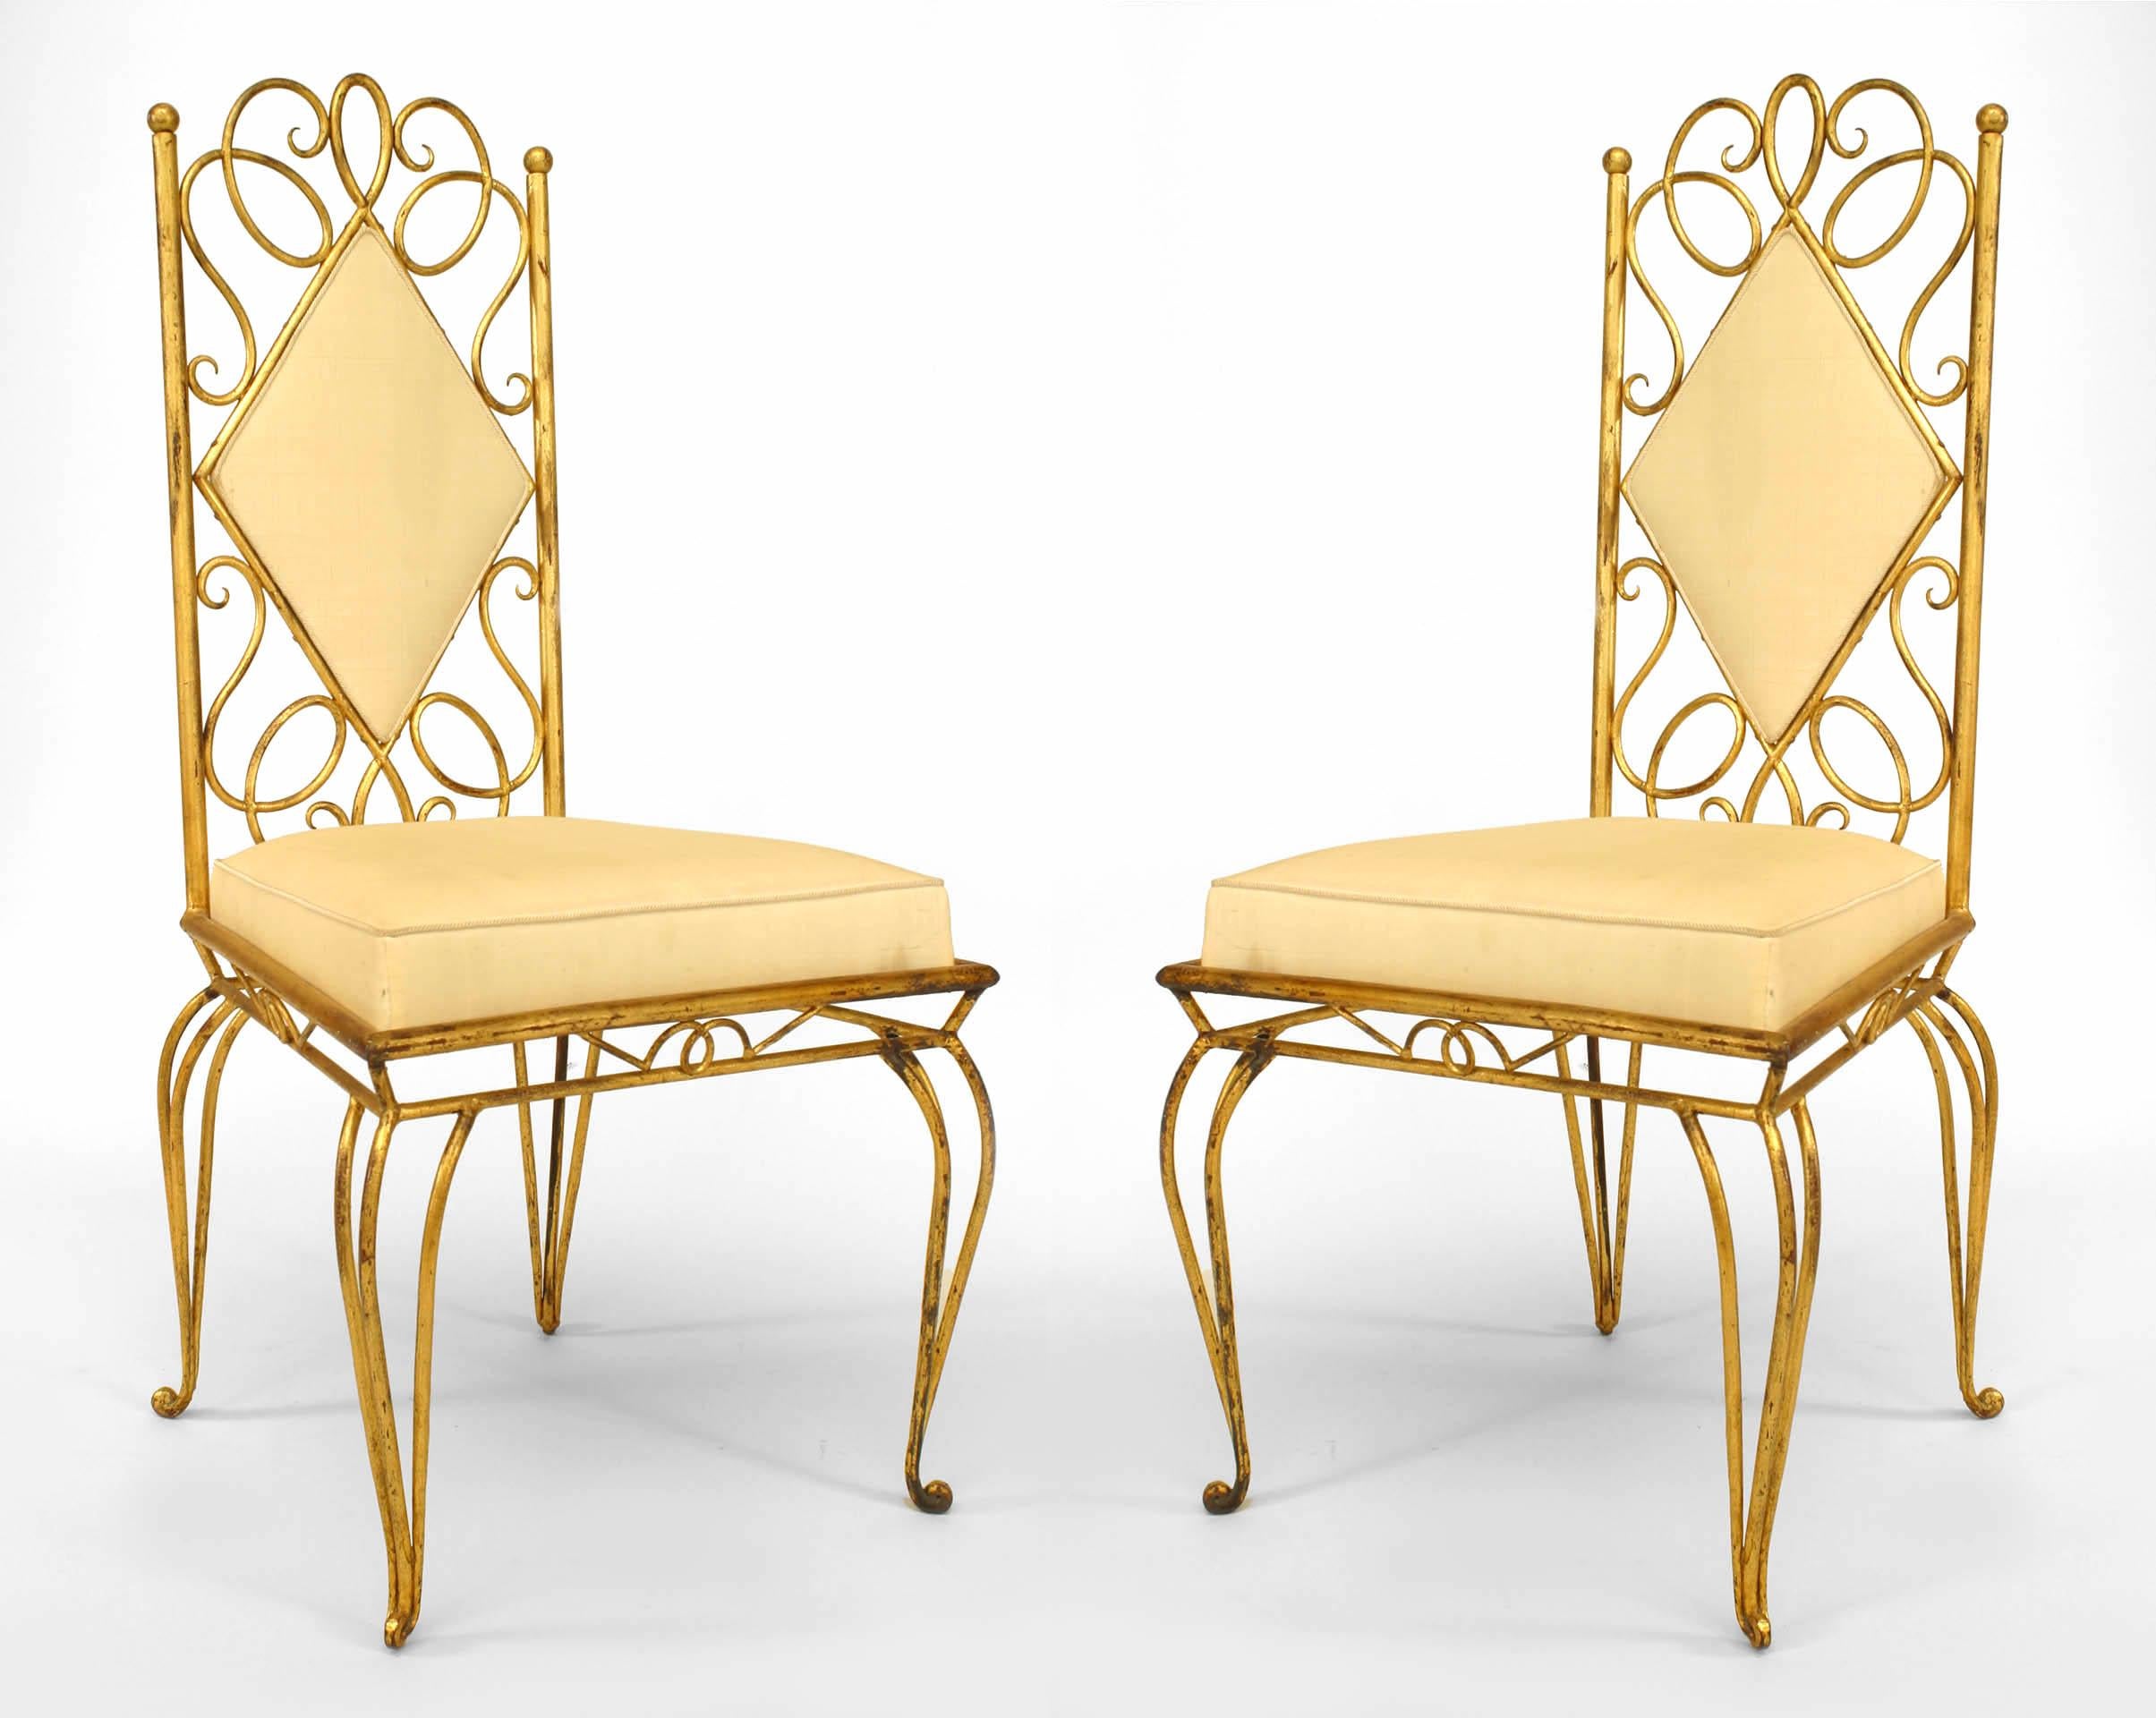 Pair of French 1940s gilt metal side chairs with scroll design and upholstered with an inset diamond shaped back panel and seat in off white fabric (att: RENE PROU)
